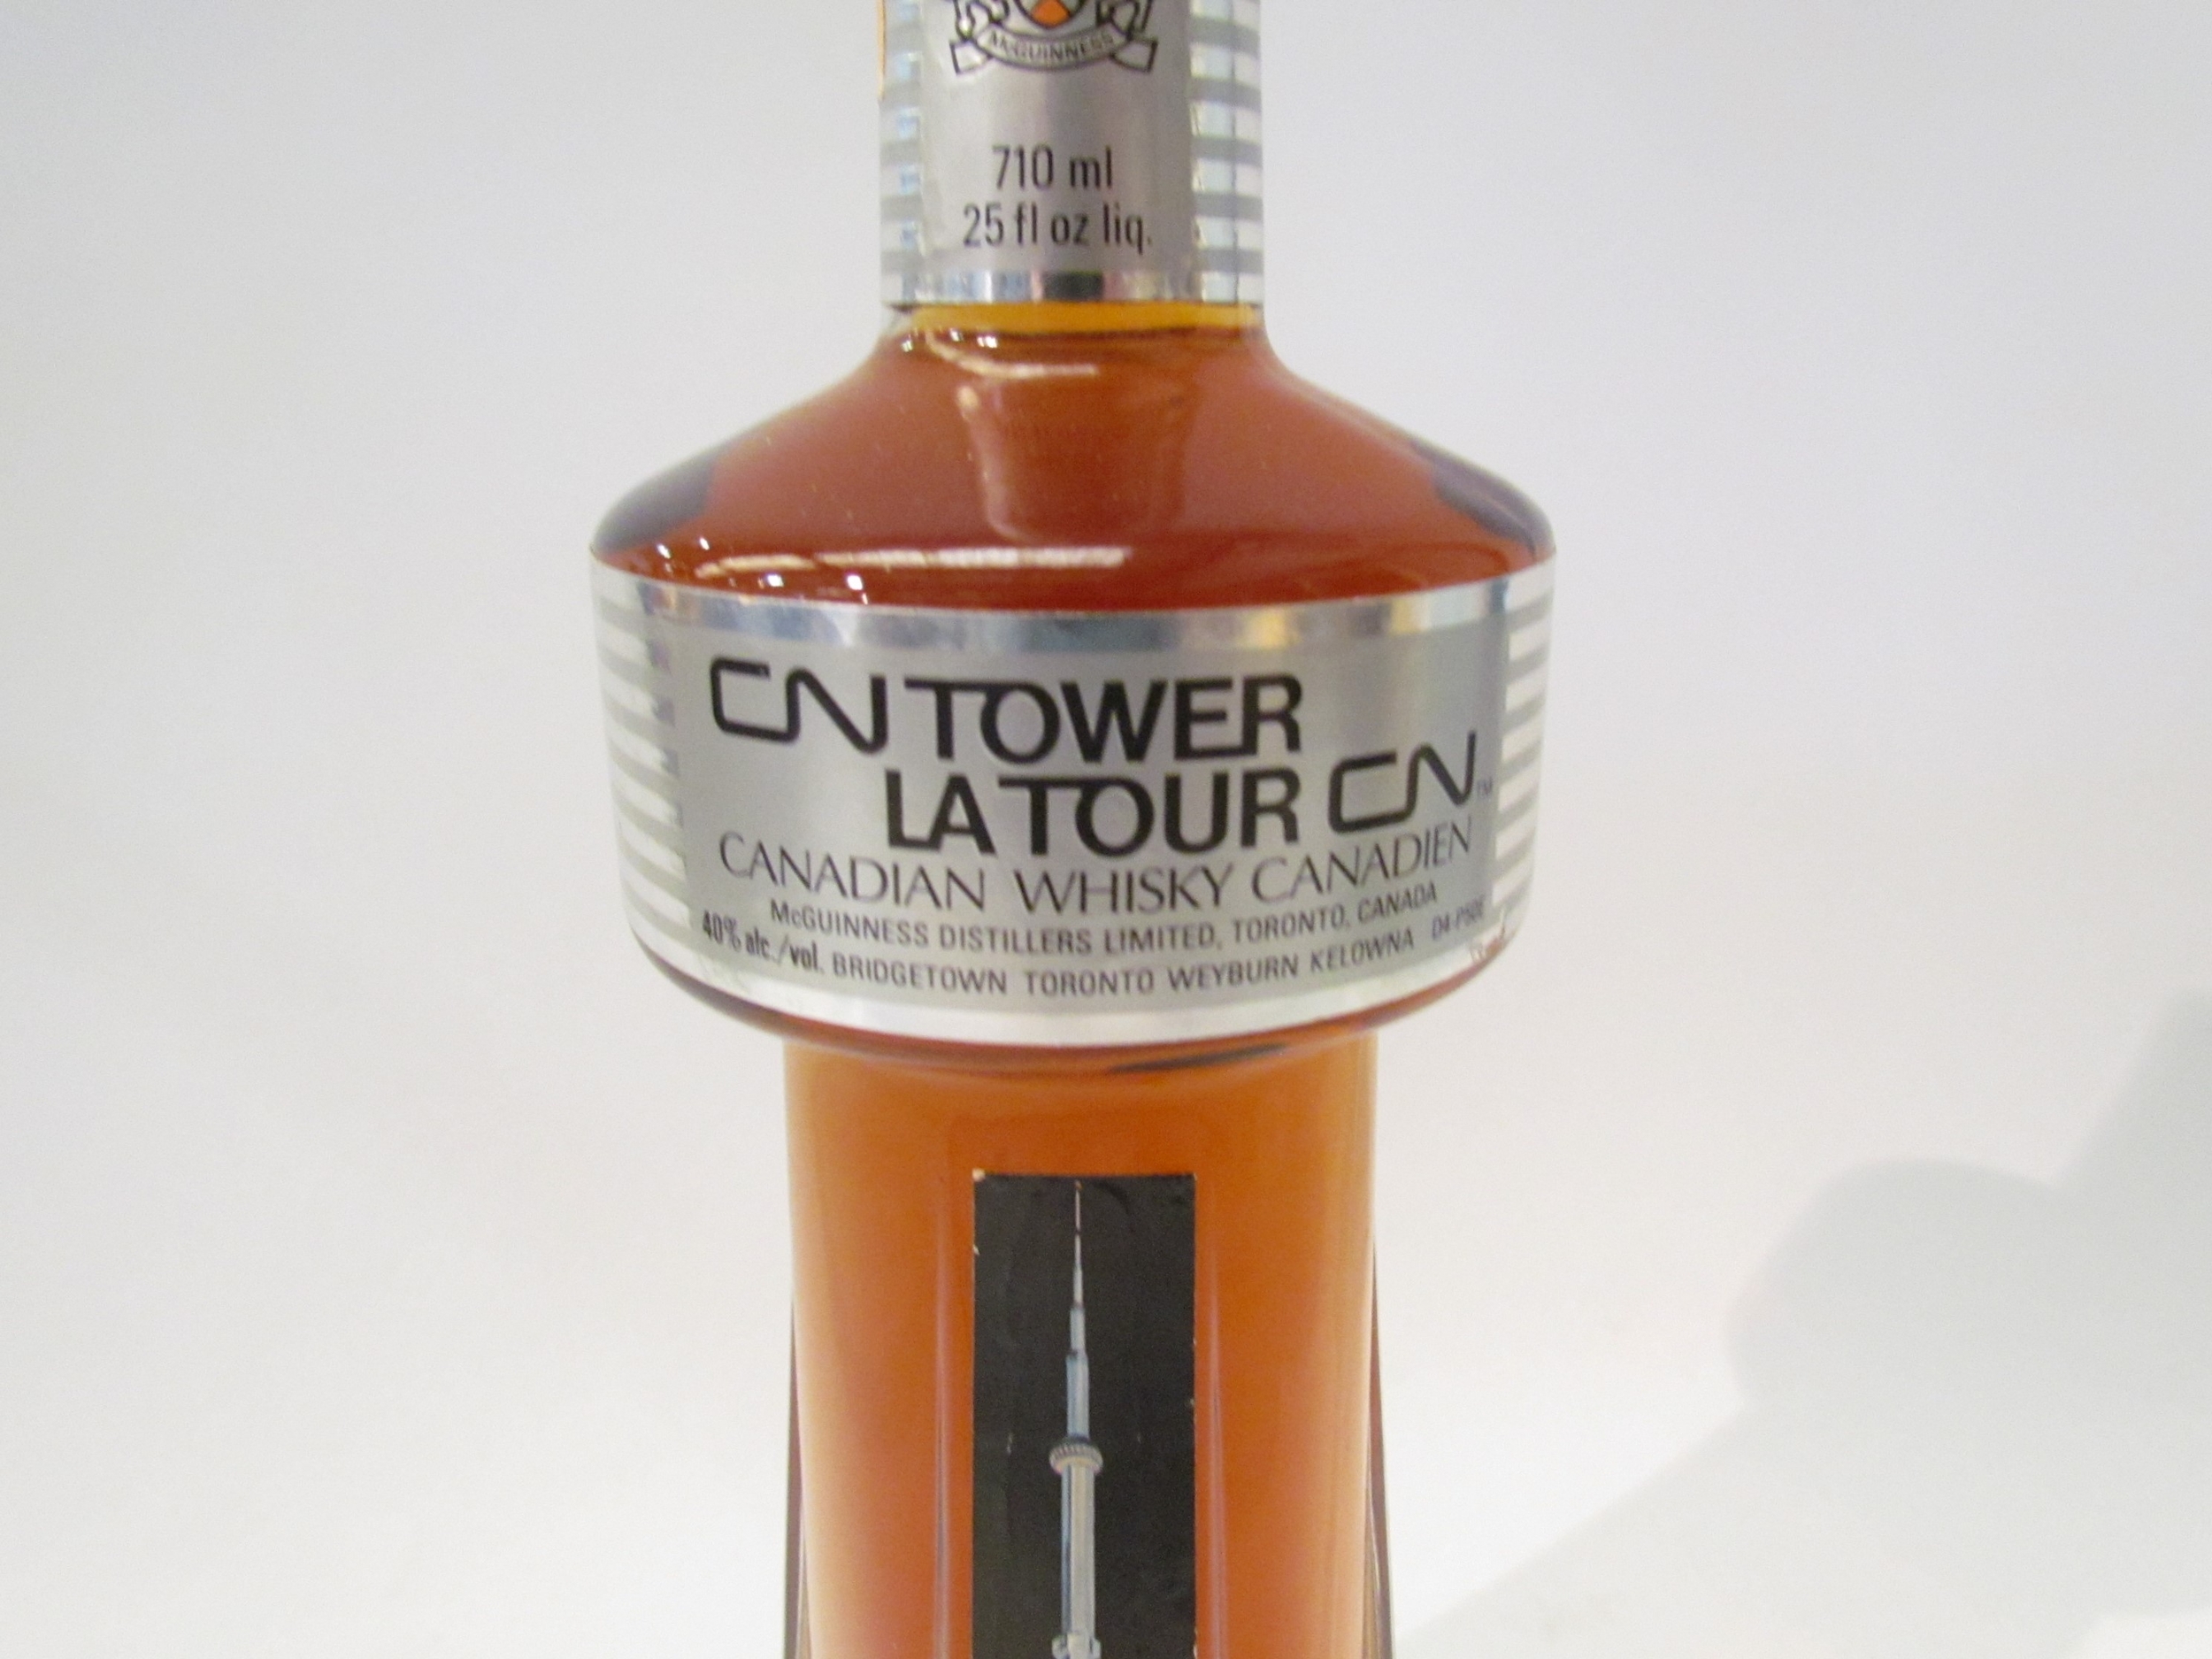 McGuinness Distillers CN Tower blended Canadian Whiskey, 710ml - Image 2 of 2